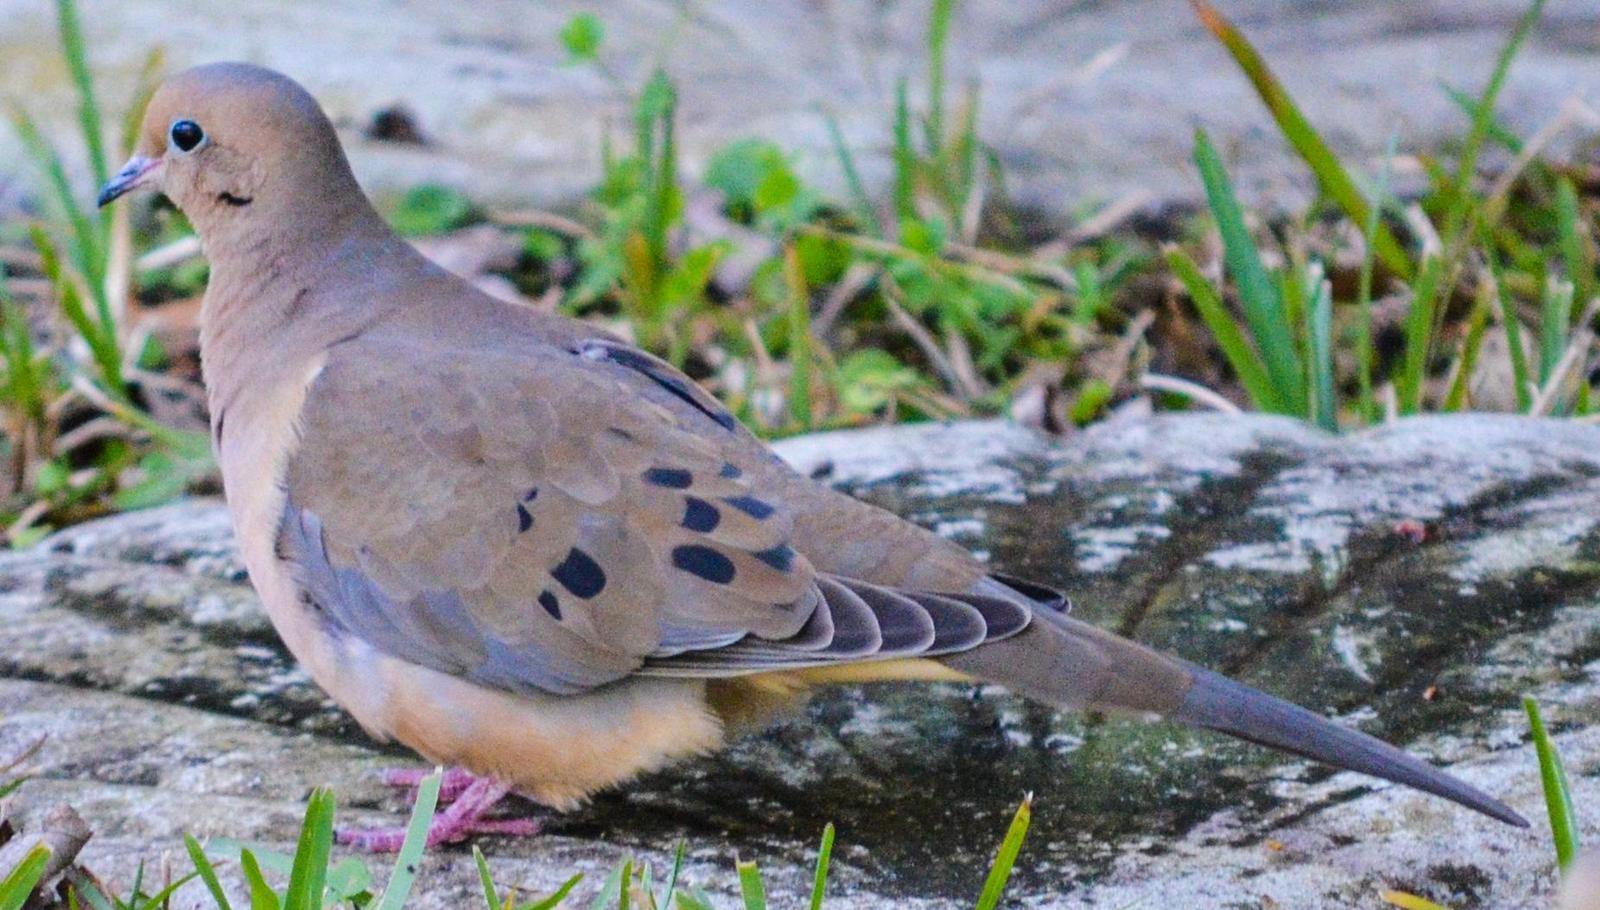 Mourning Dove Photo by Mike Ballentine